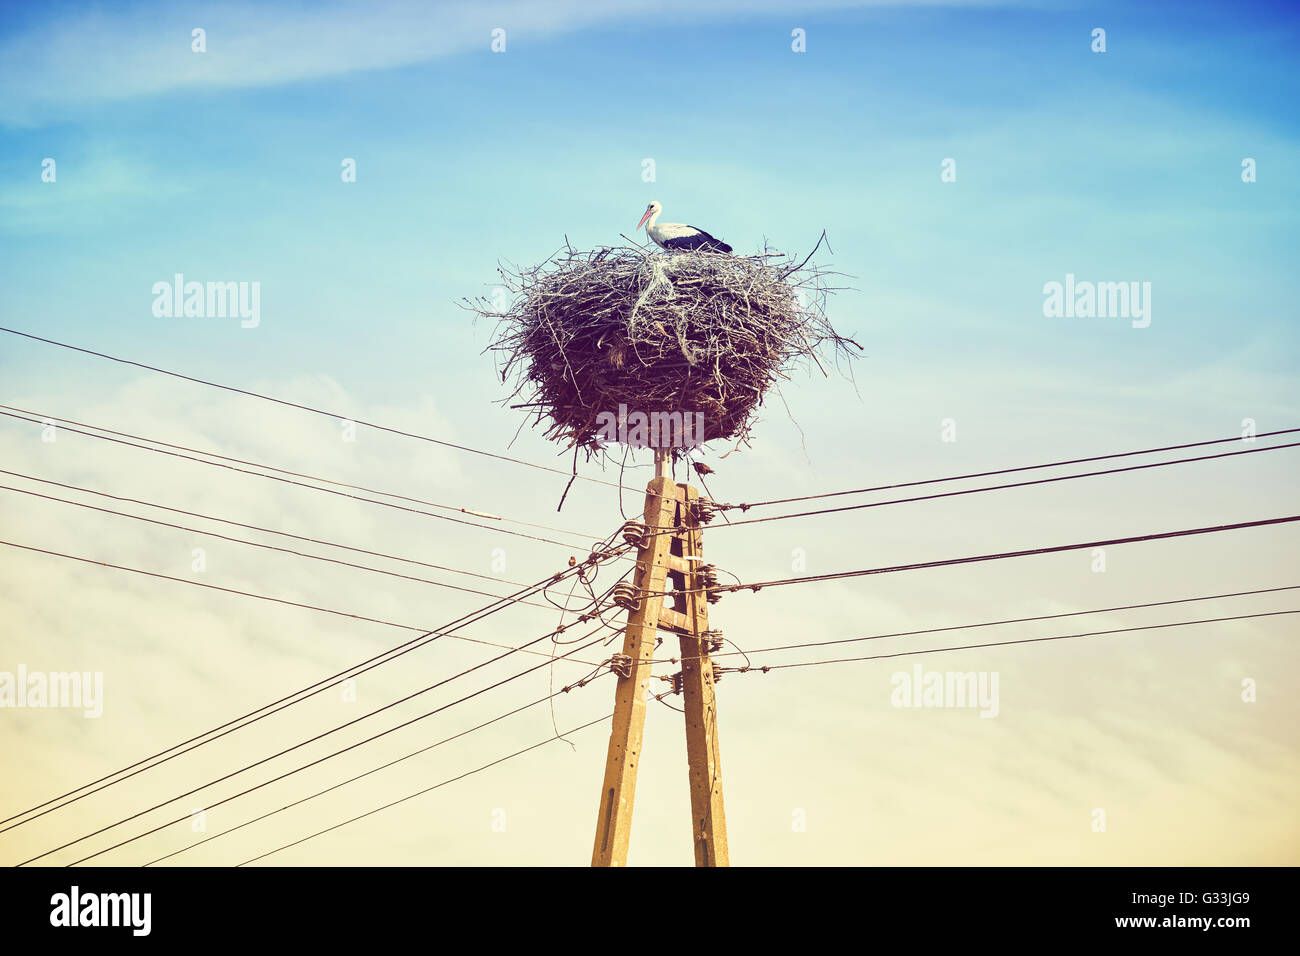 Retro toned stork in nest on a power line pole. Stock Photo